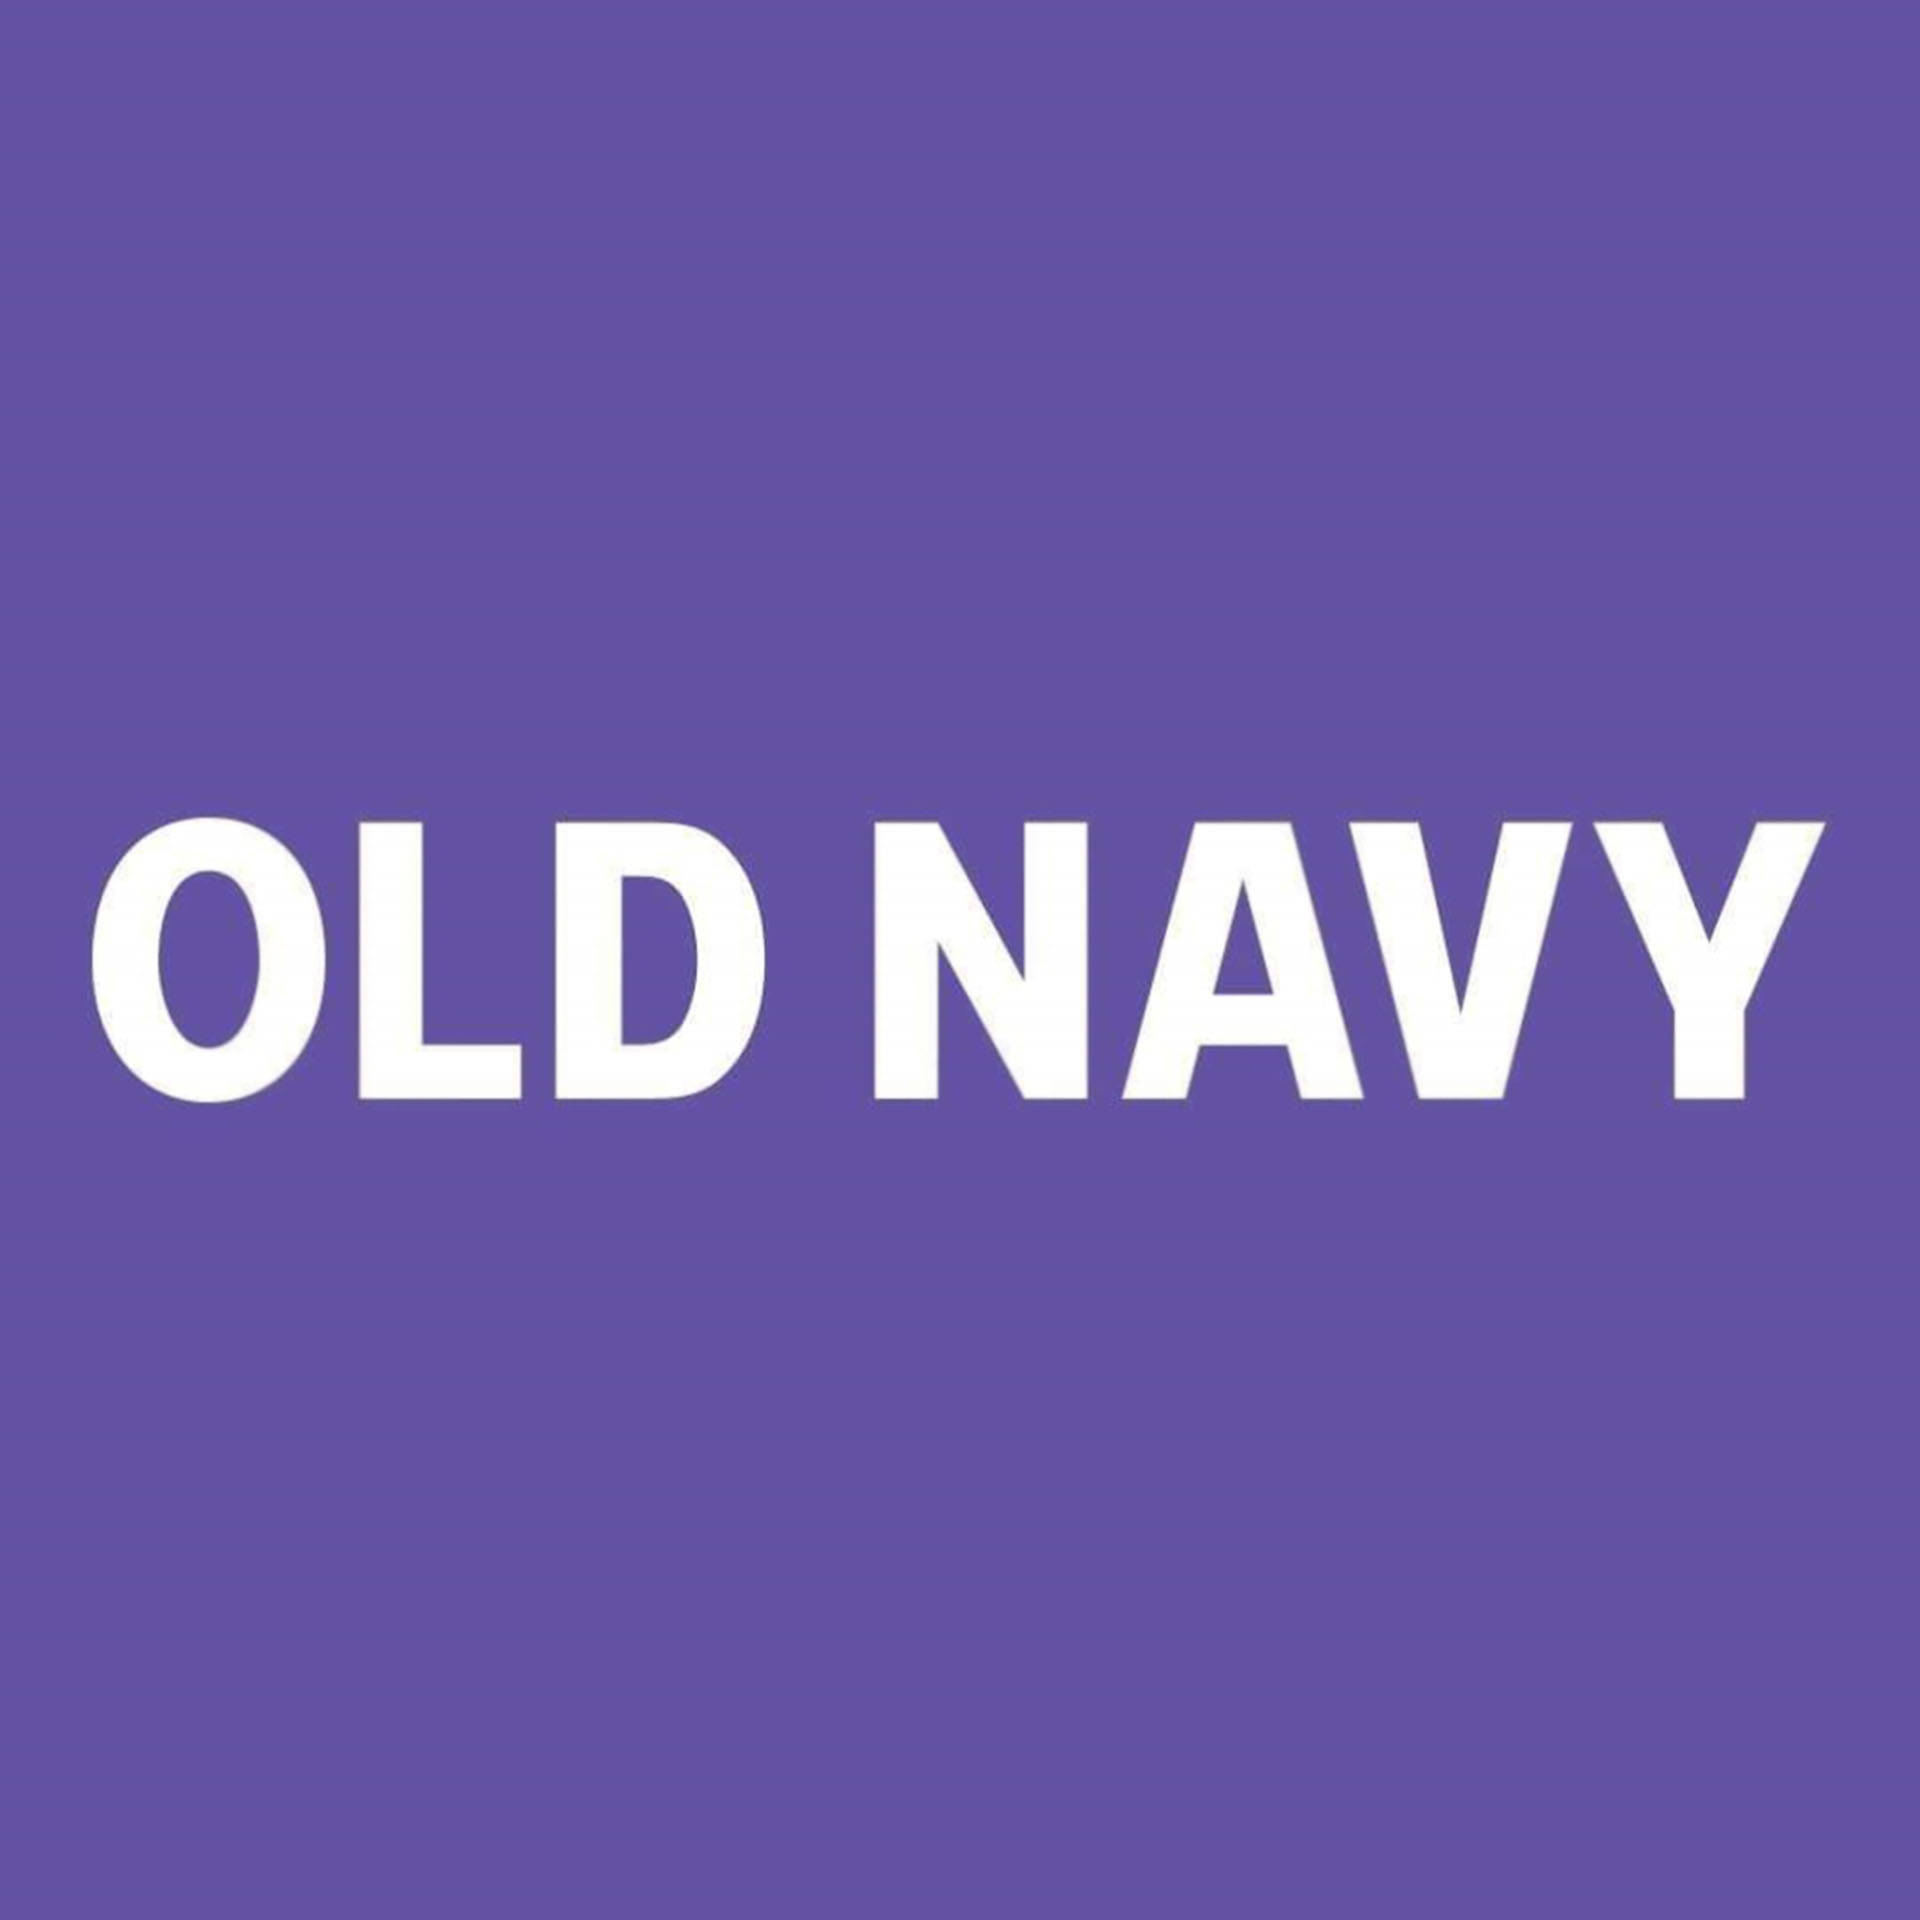 Vibrant Old Navy Logo on a Purple Background Wallpaper